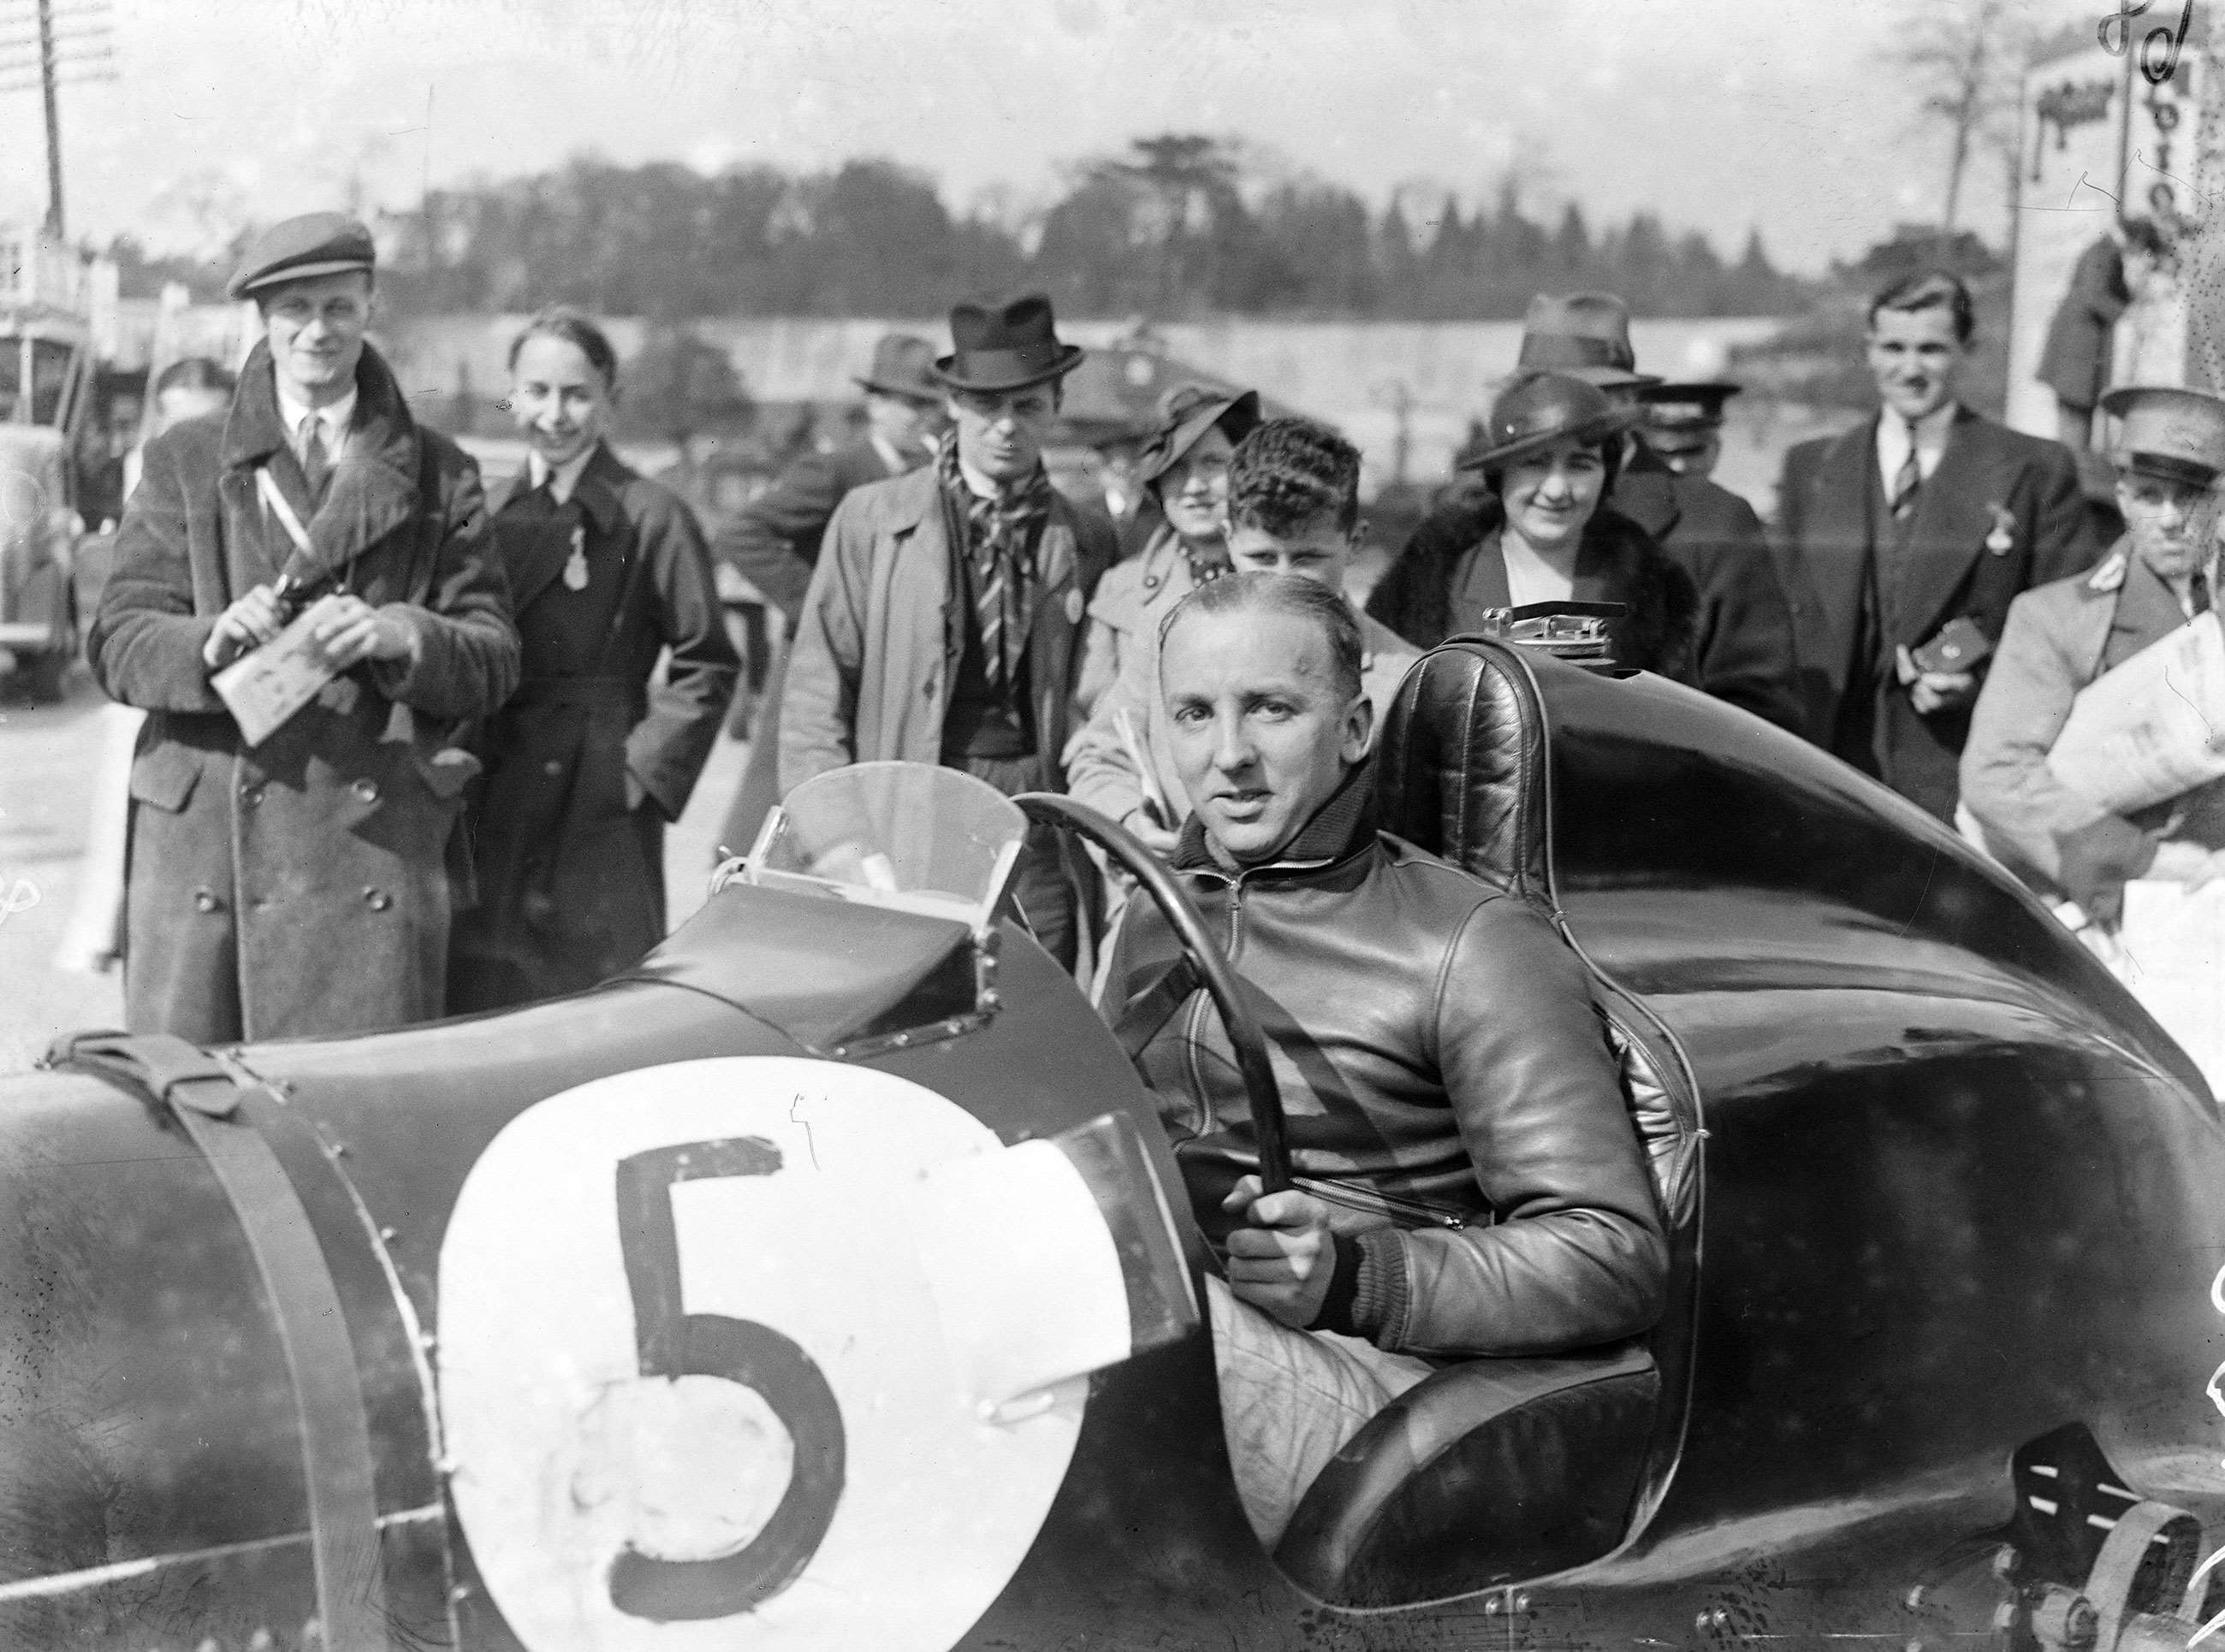 Pacey at Brooklands on Easter Sunday, 1936.